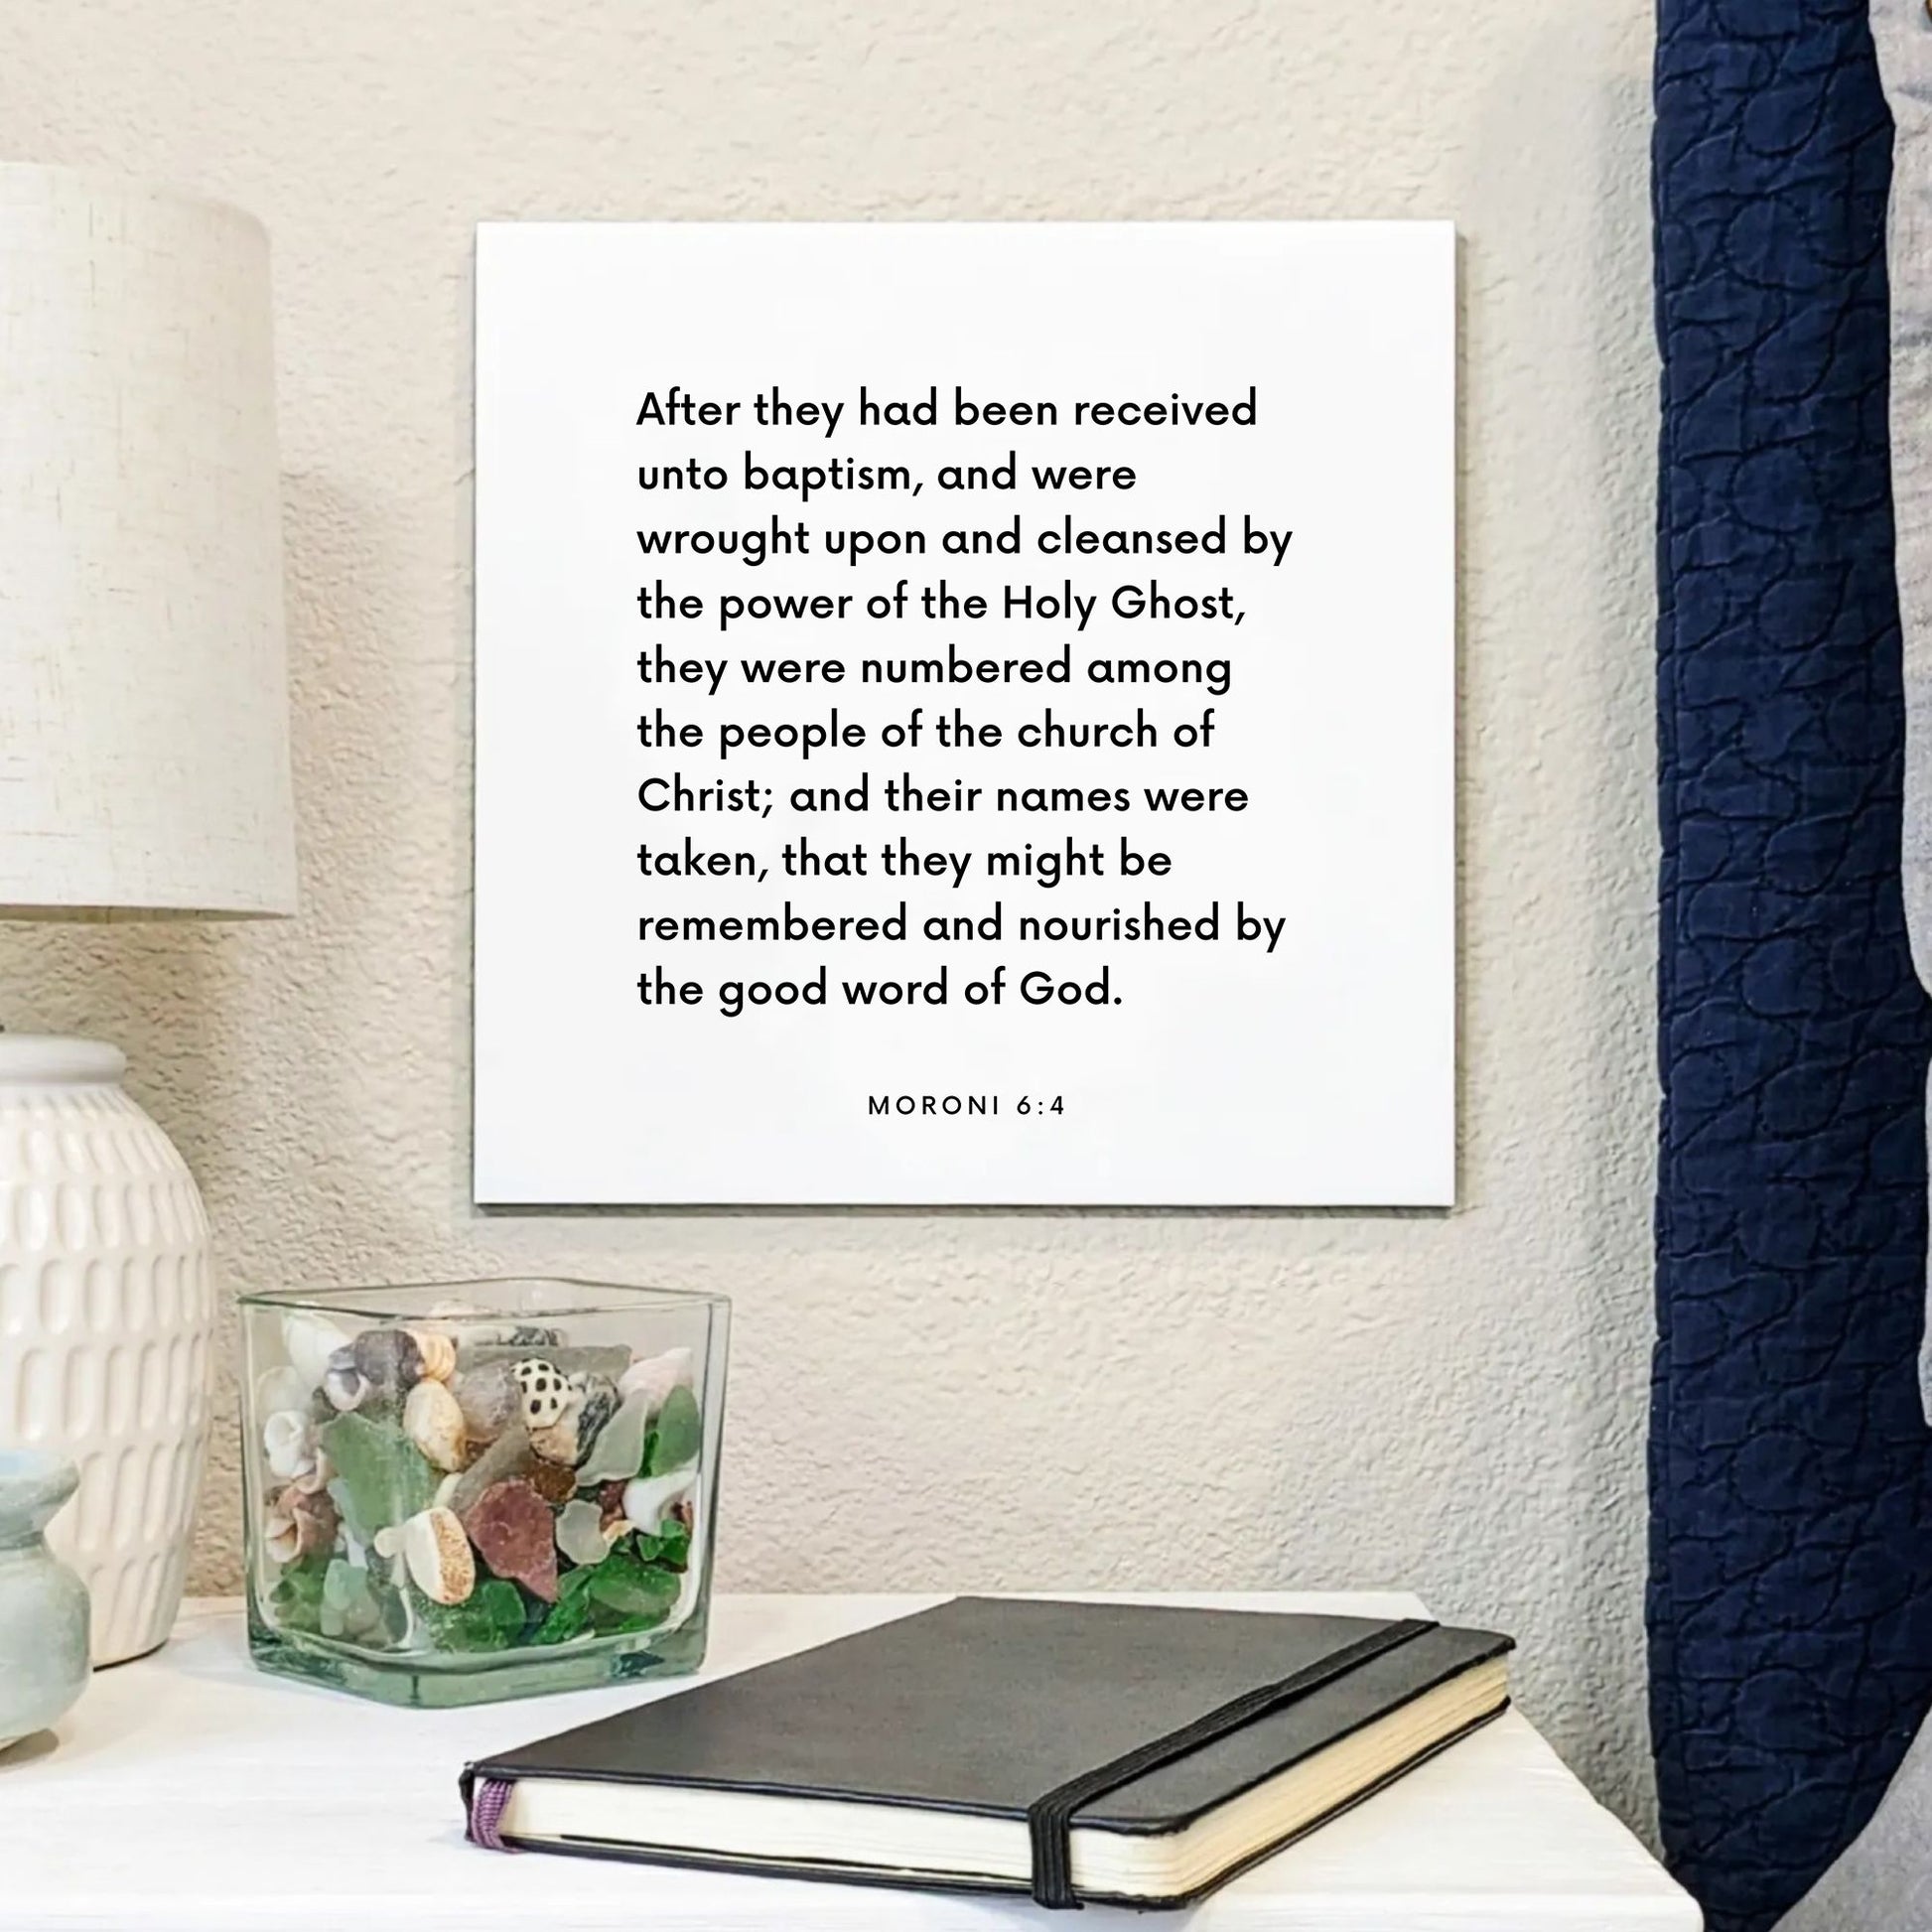 Bedside mouting of the scripture tile for Moroni 6:4 - "Their names were taken, that they might be remembered"